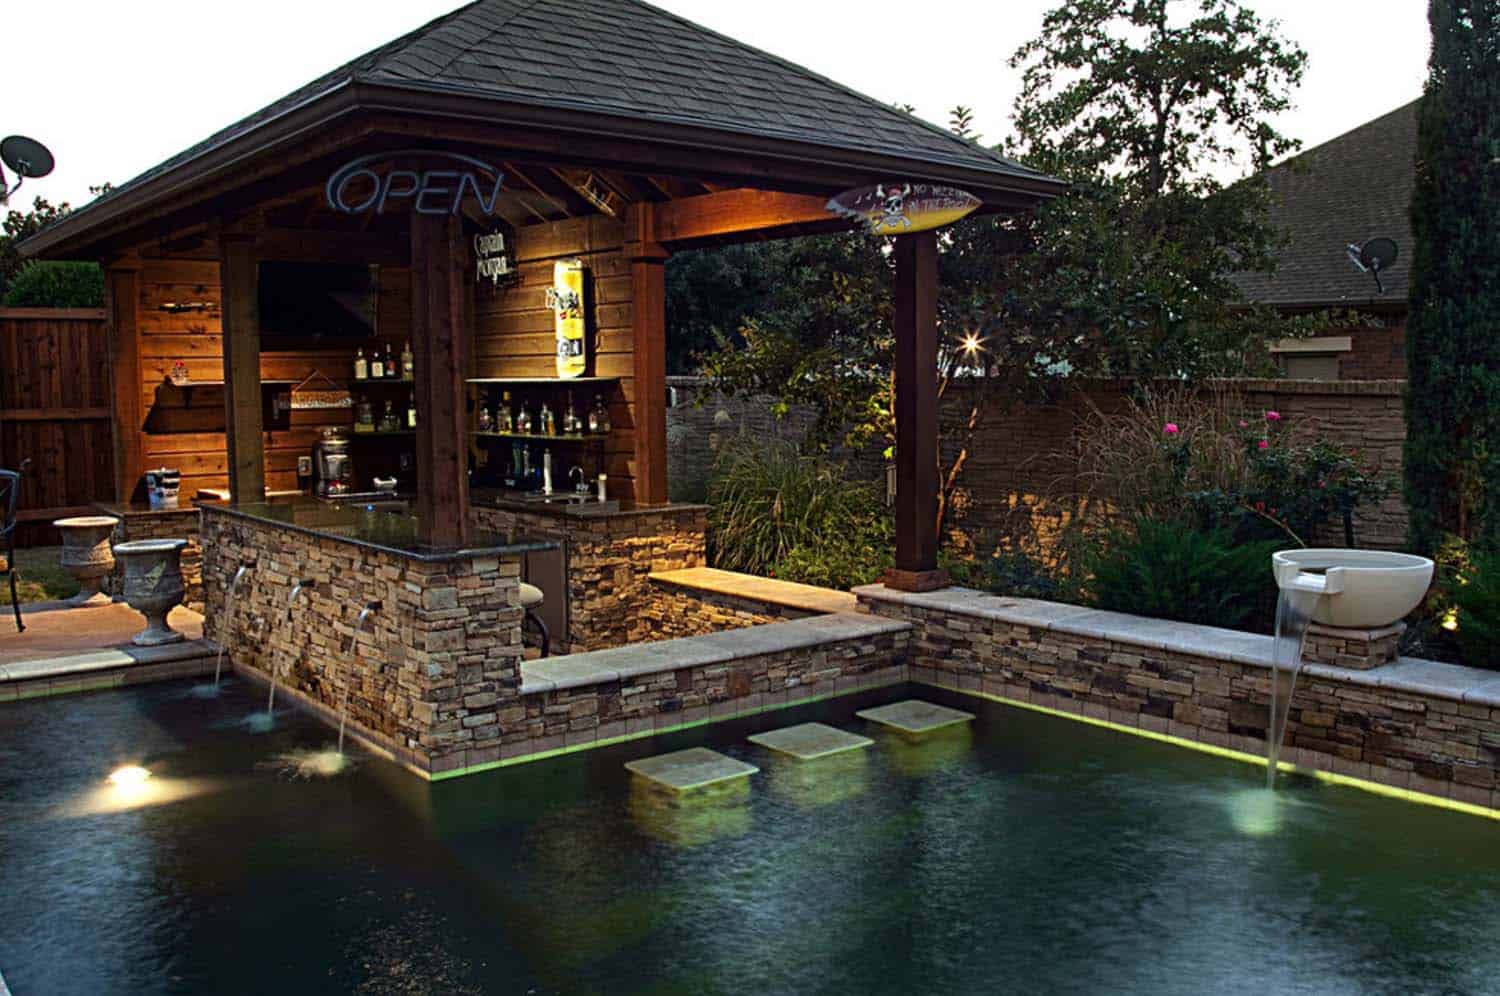 Consider placing your built-in bar coming off directly from your pool in order to create the ultimate staycation feel.